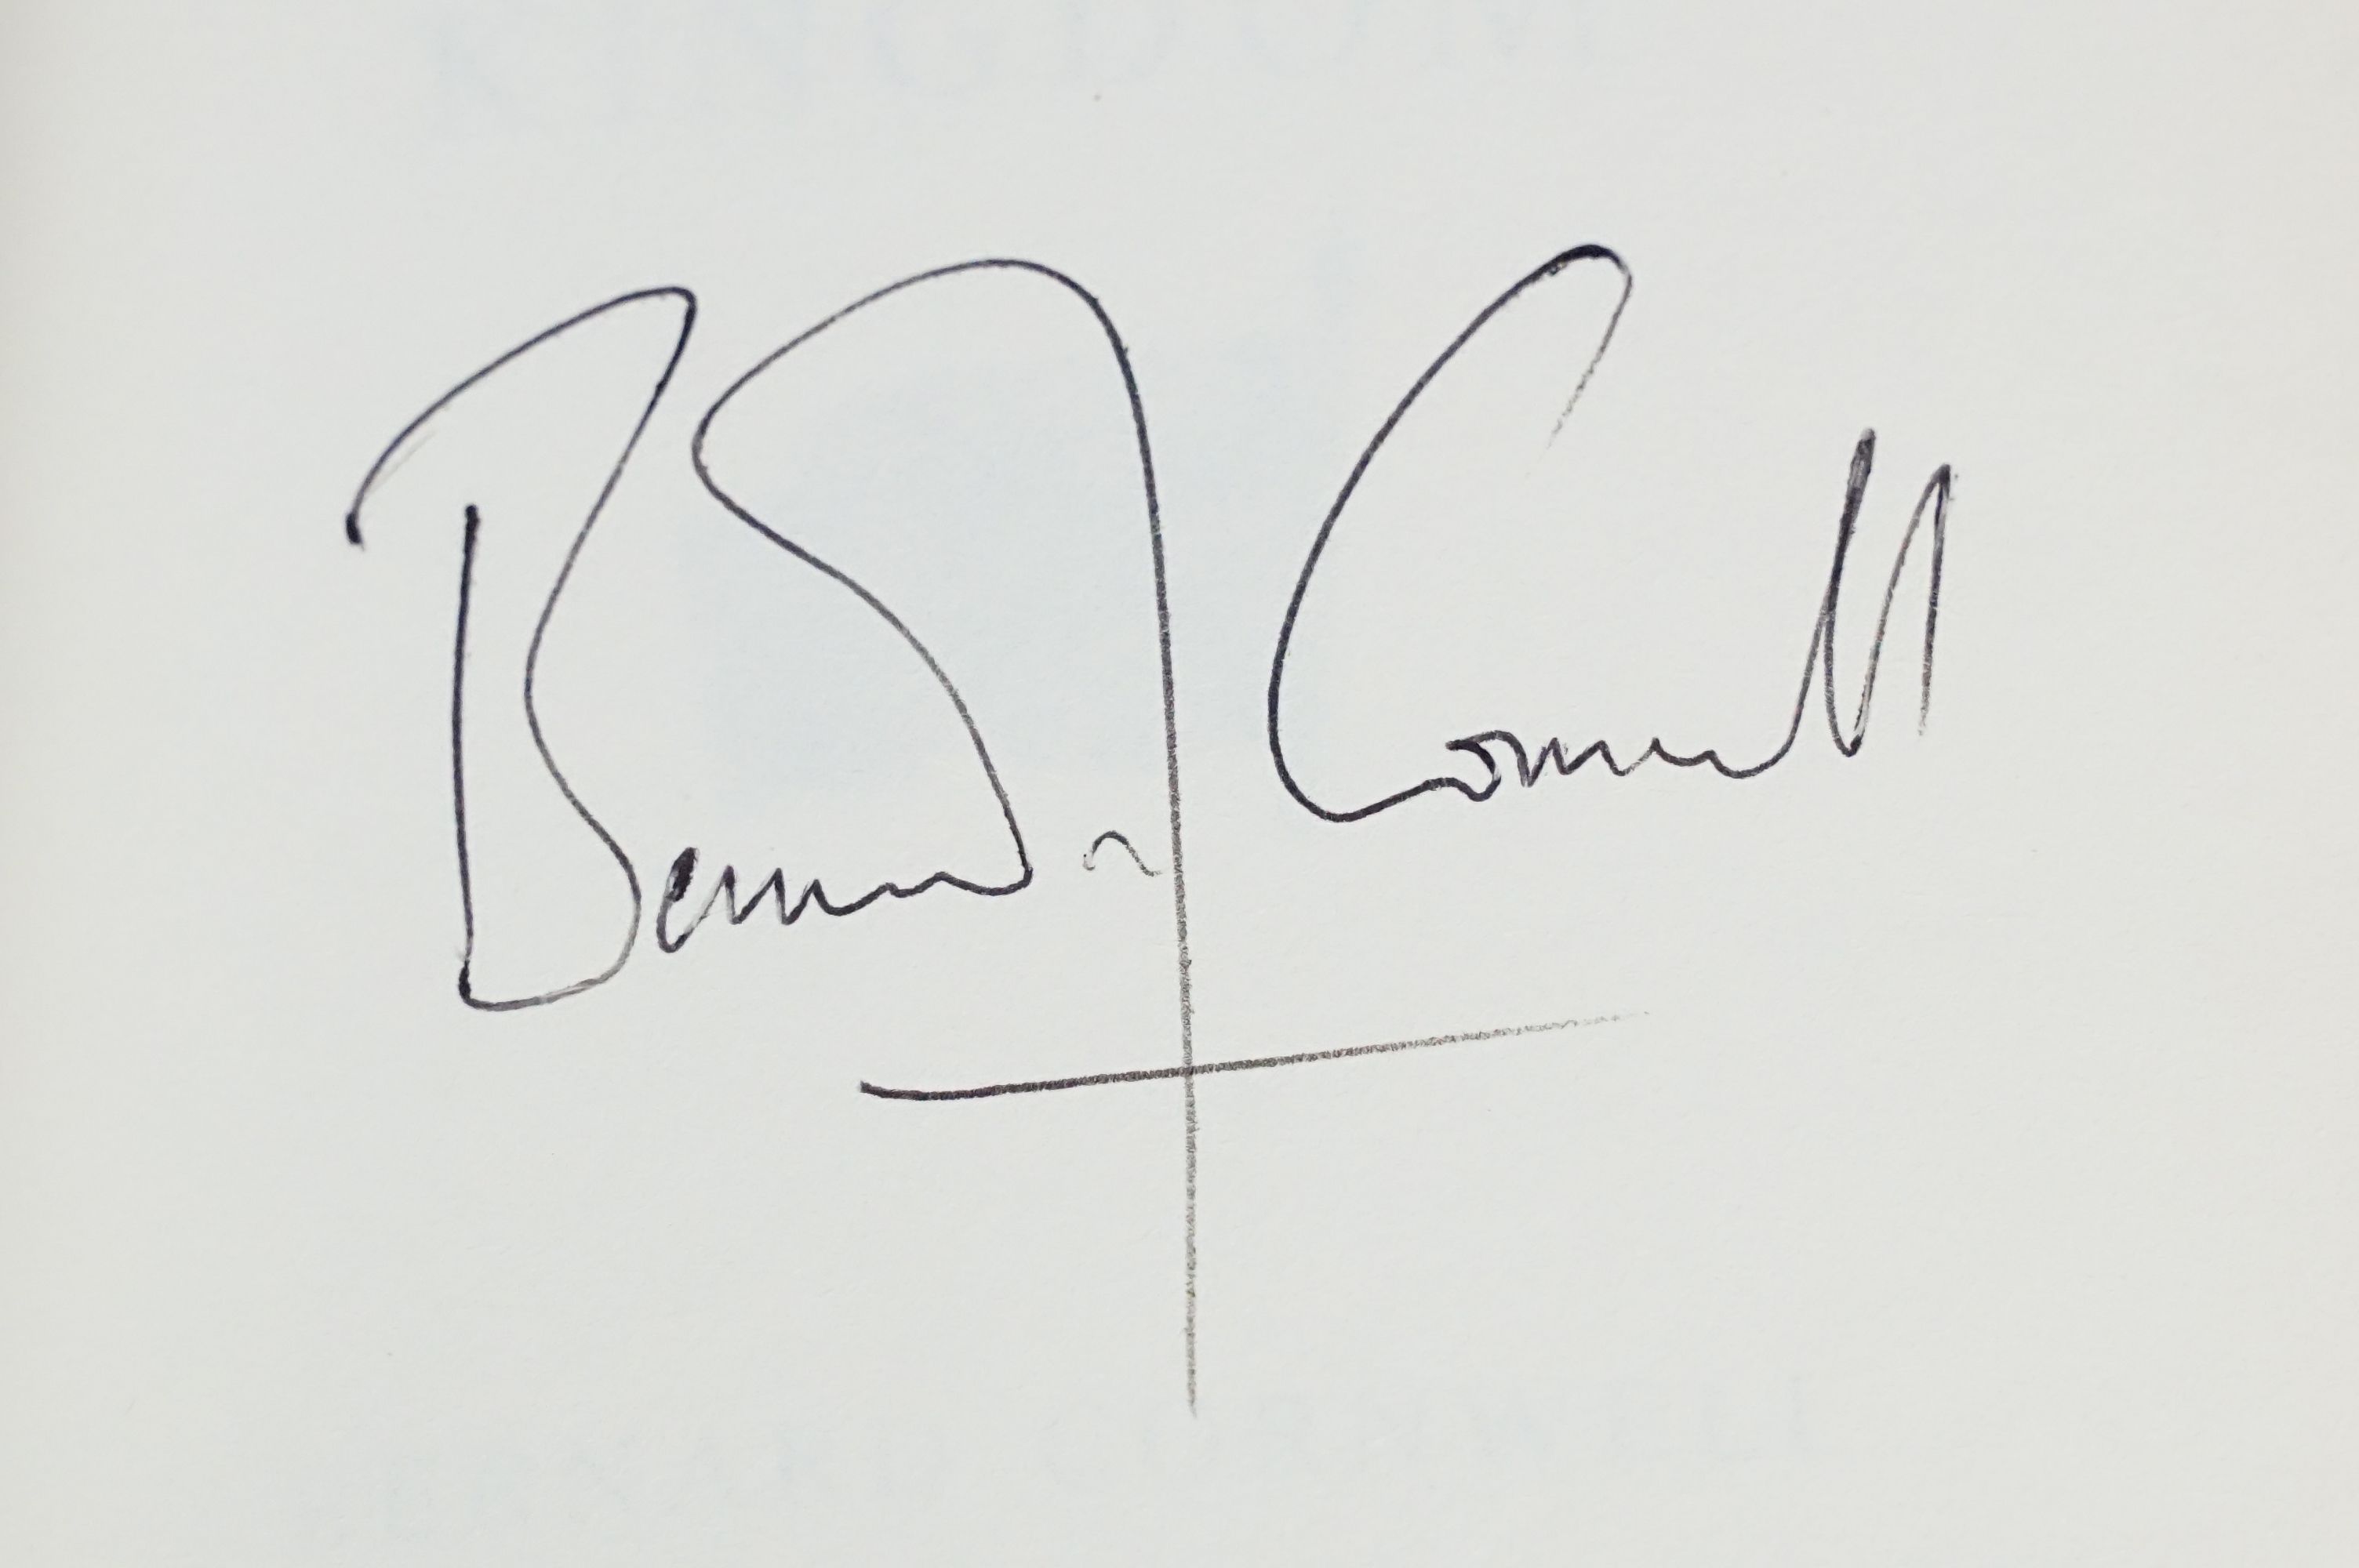 Books - Two Bernard Cornwell signed first edition hardback books to include 'The Last Kingdom' - Image 5 of 6